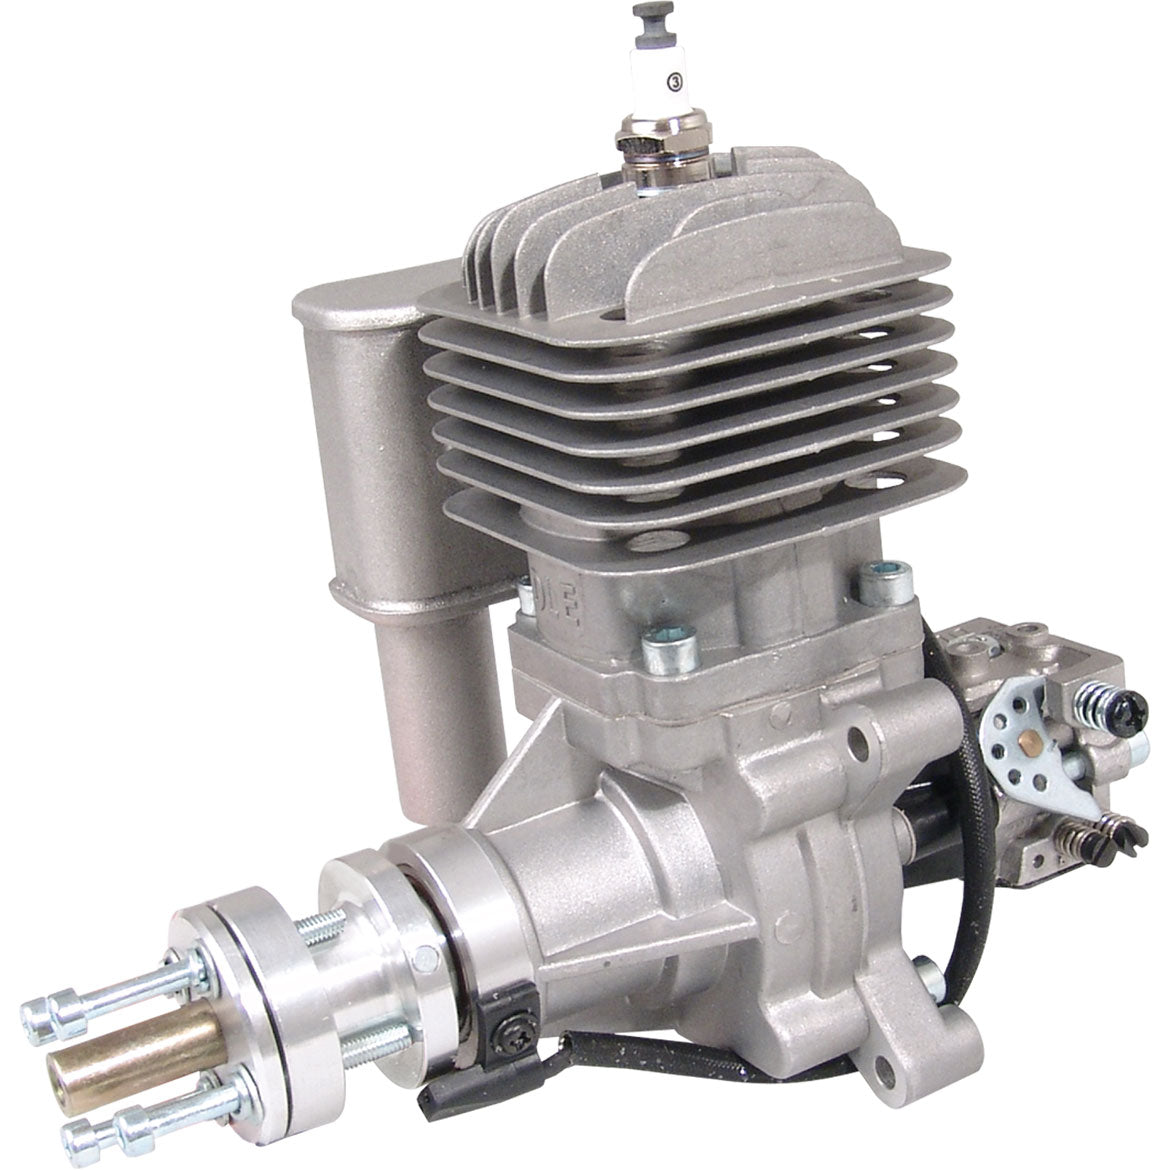 DLE 30cc Gasoline Powered Engine with Electronic Ignition